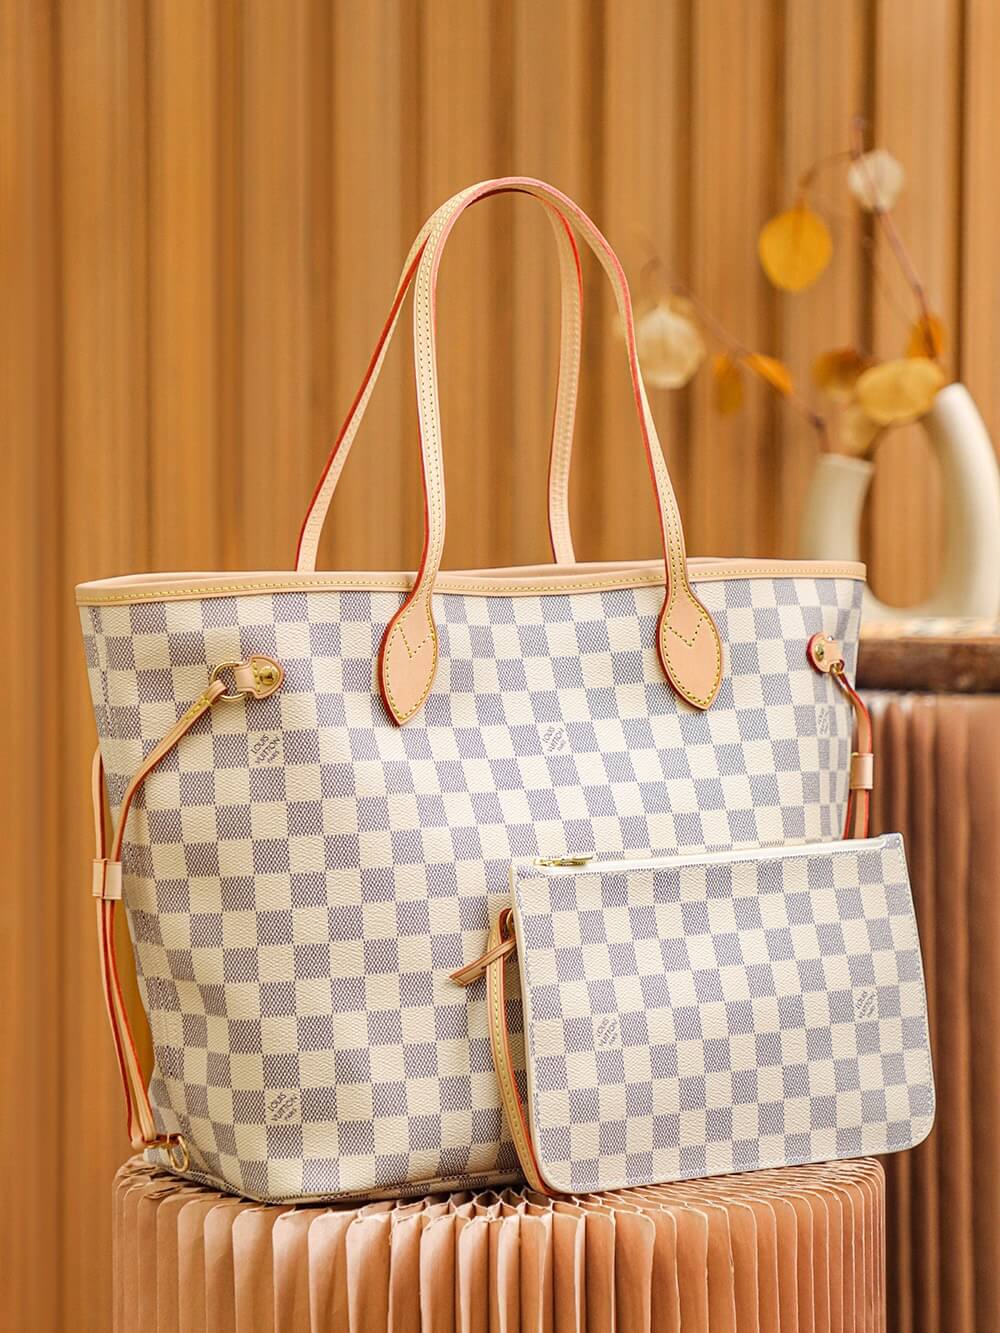 AAA Replica Louis Vuitton Damier Azur Neverfull MM Bag With